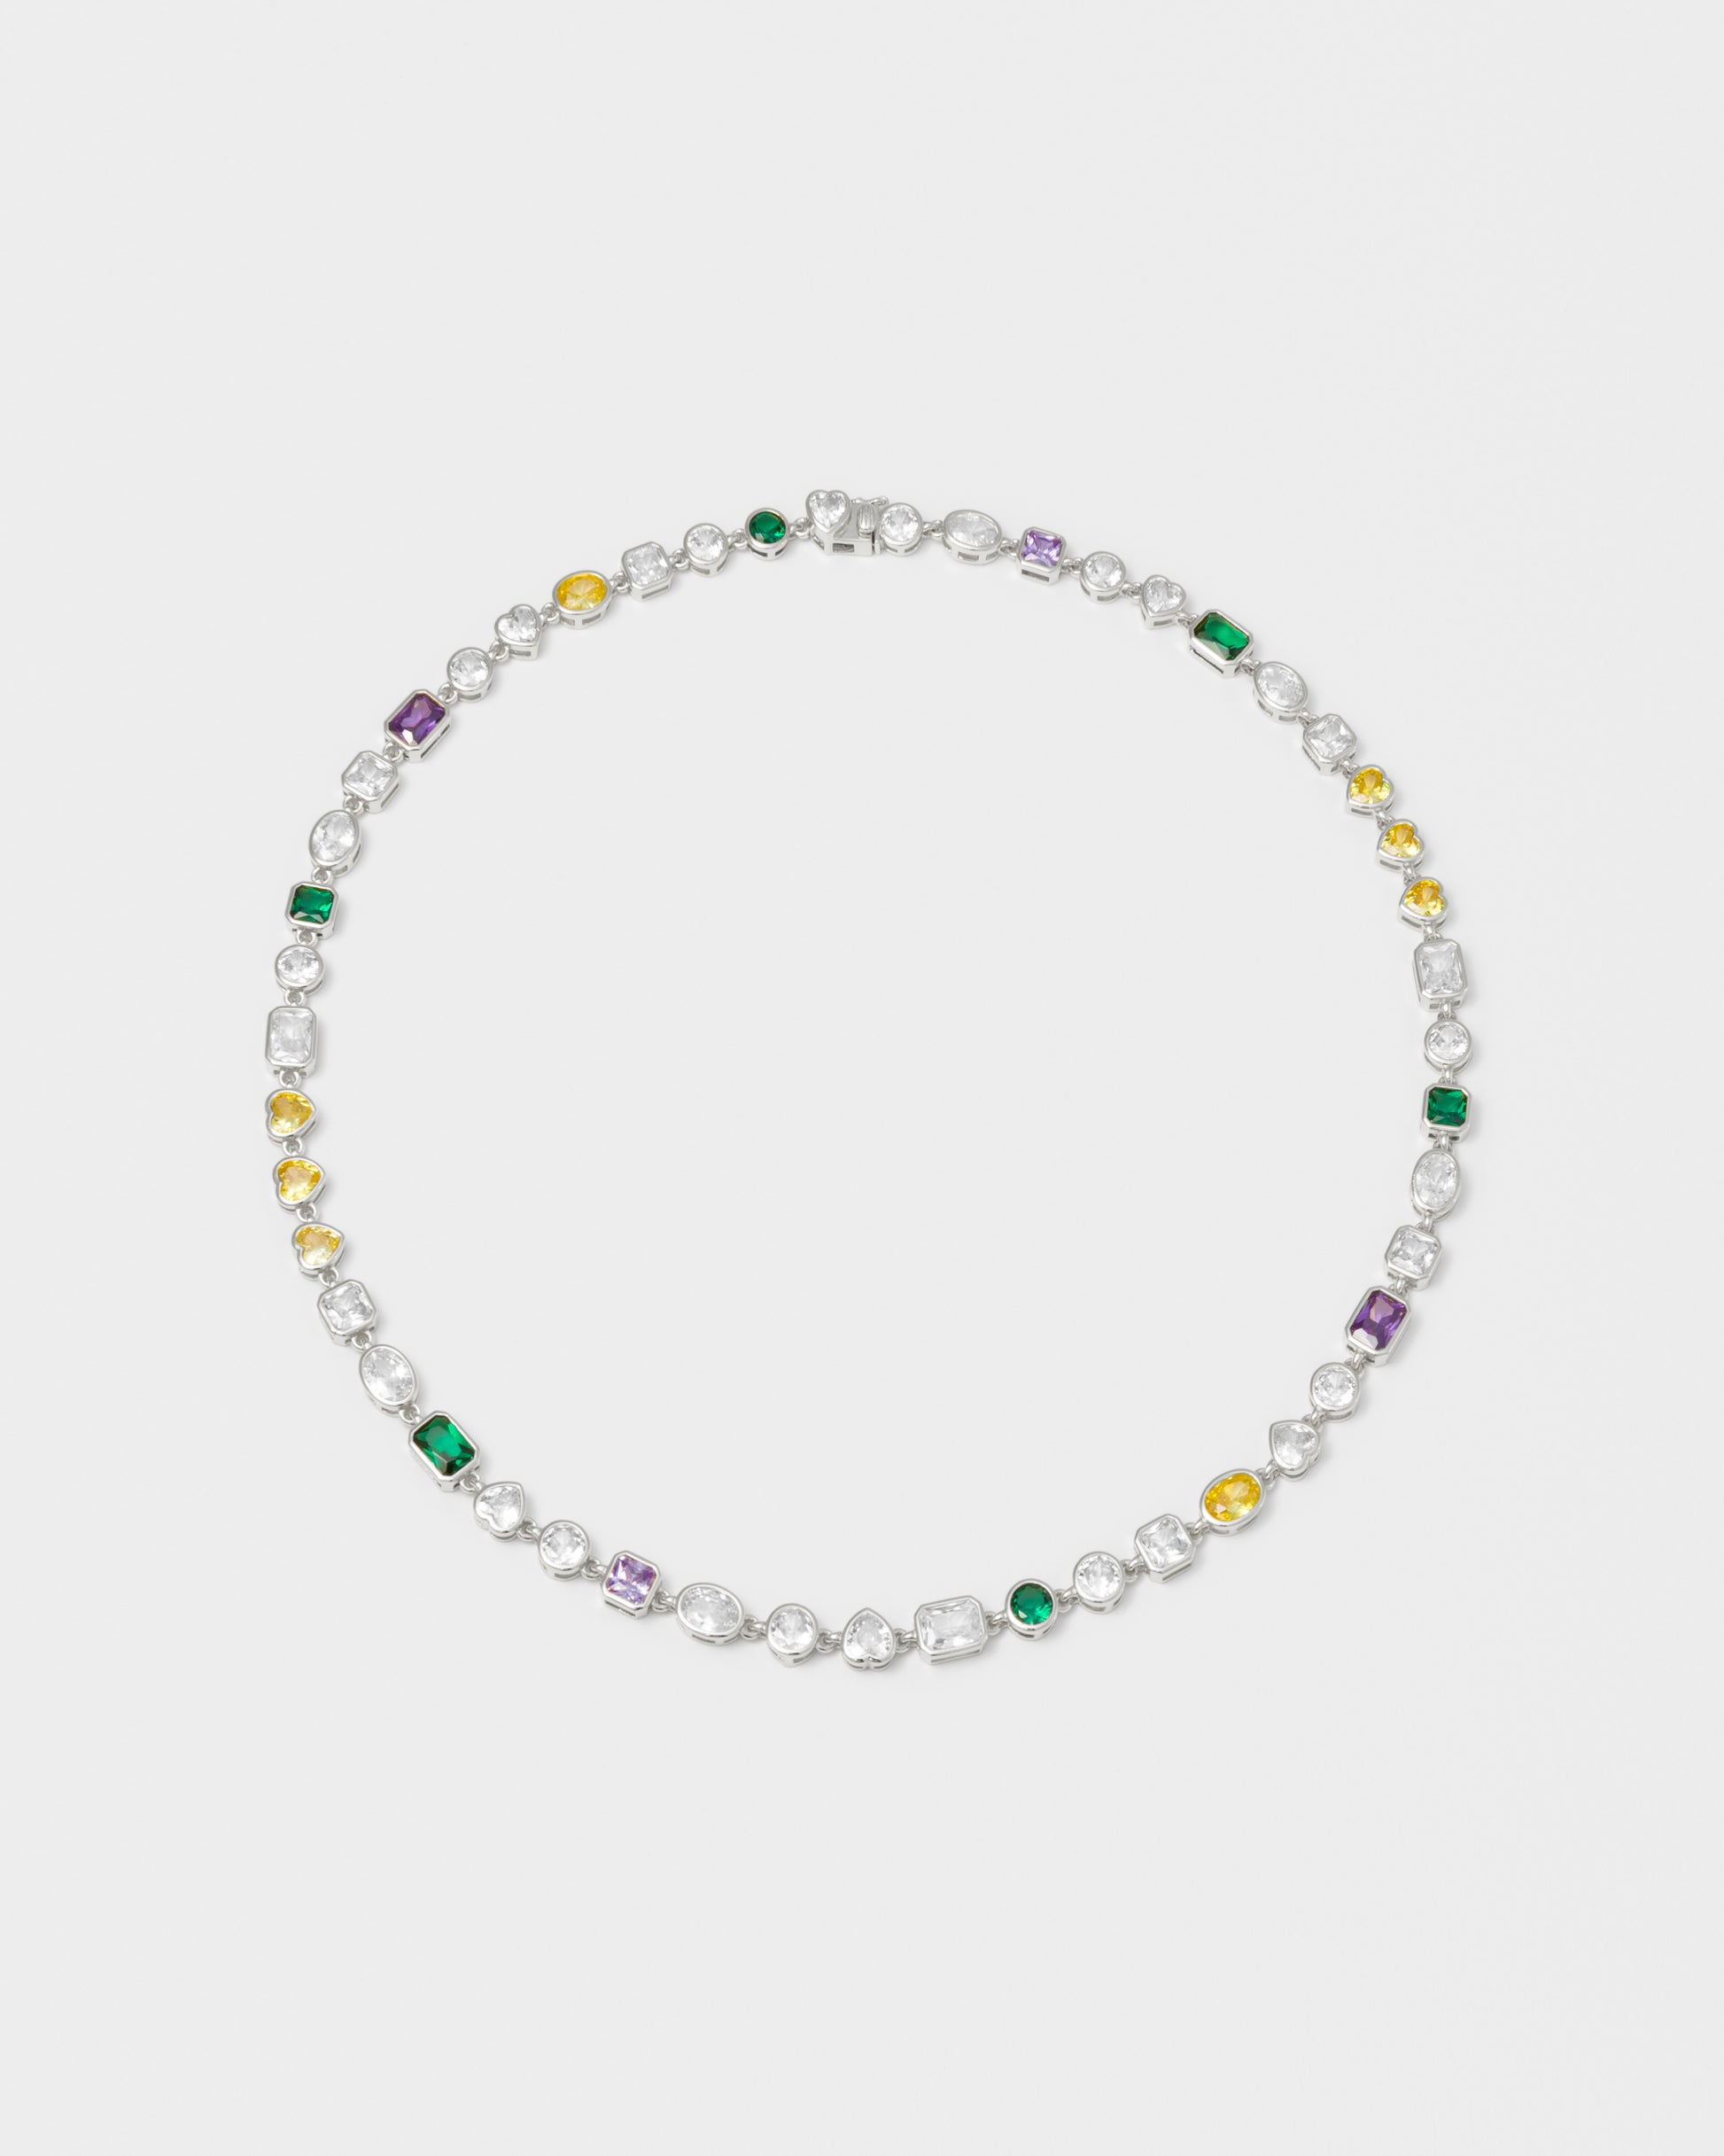 mixed bezels chain necklace with 18kt white gold coating and hand-set stones of irregular shapes and colors. Ensemble of rectangular, square, round and heart-shaped stones in diamond white, amethyst, lilac, emerald green and gold yellow. Invisible closure with logo.